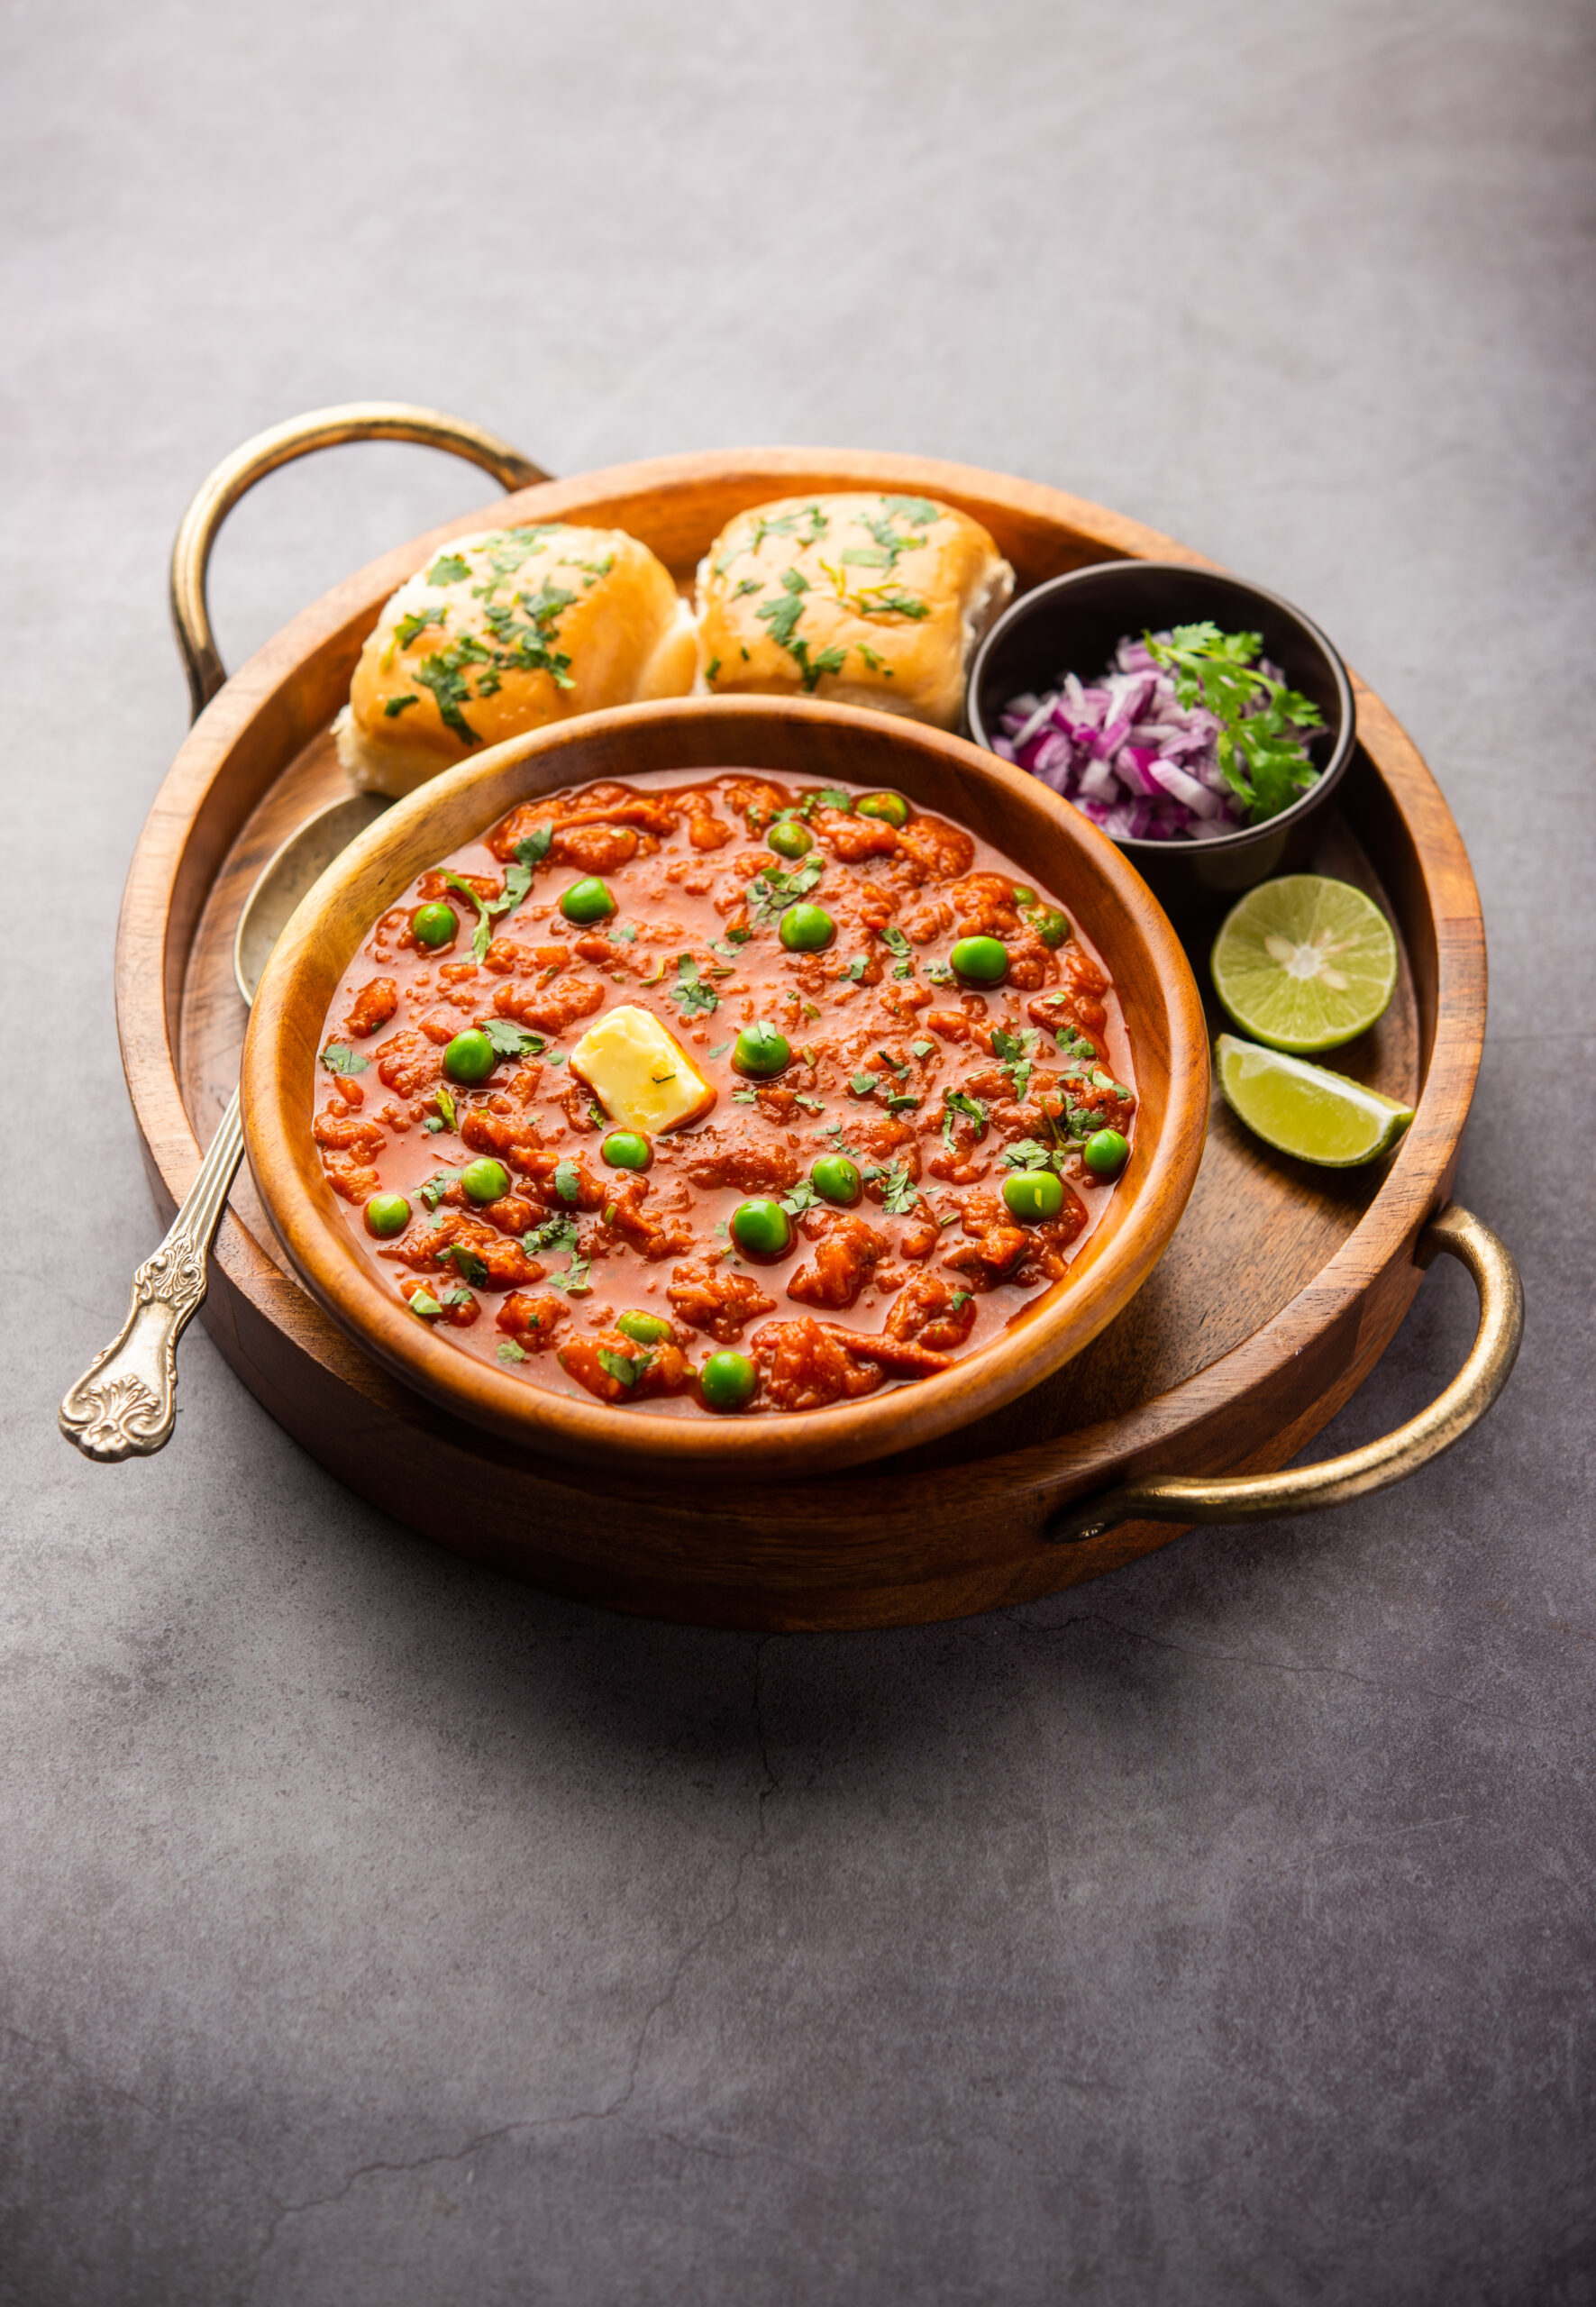 Pav bhaji is a fast food dish from India consisting of a thick vegetable curry served with a soft bread roll